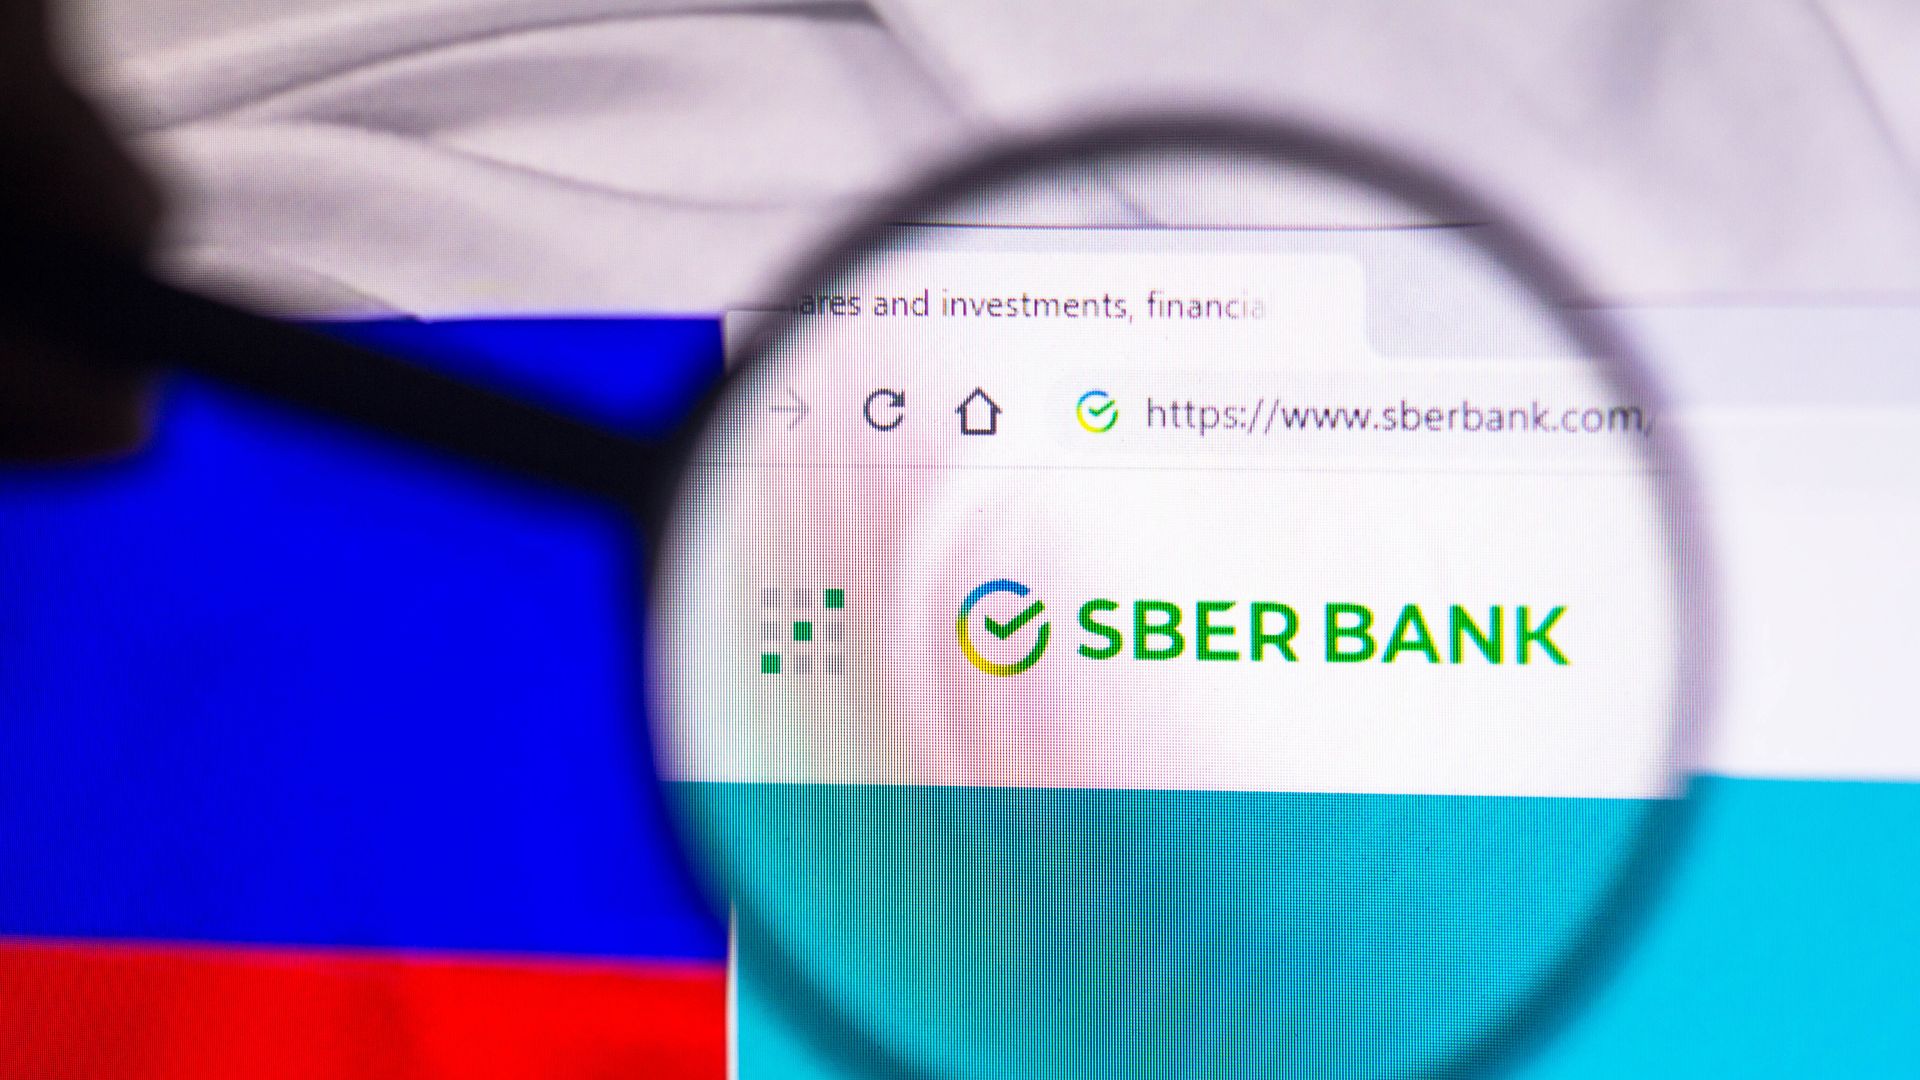 The homepage of Russian bank Sberbank is seen in front of the Russian flag.